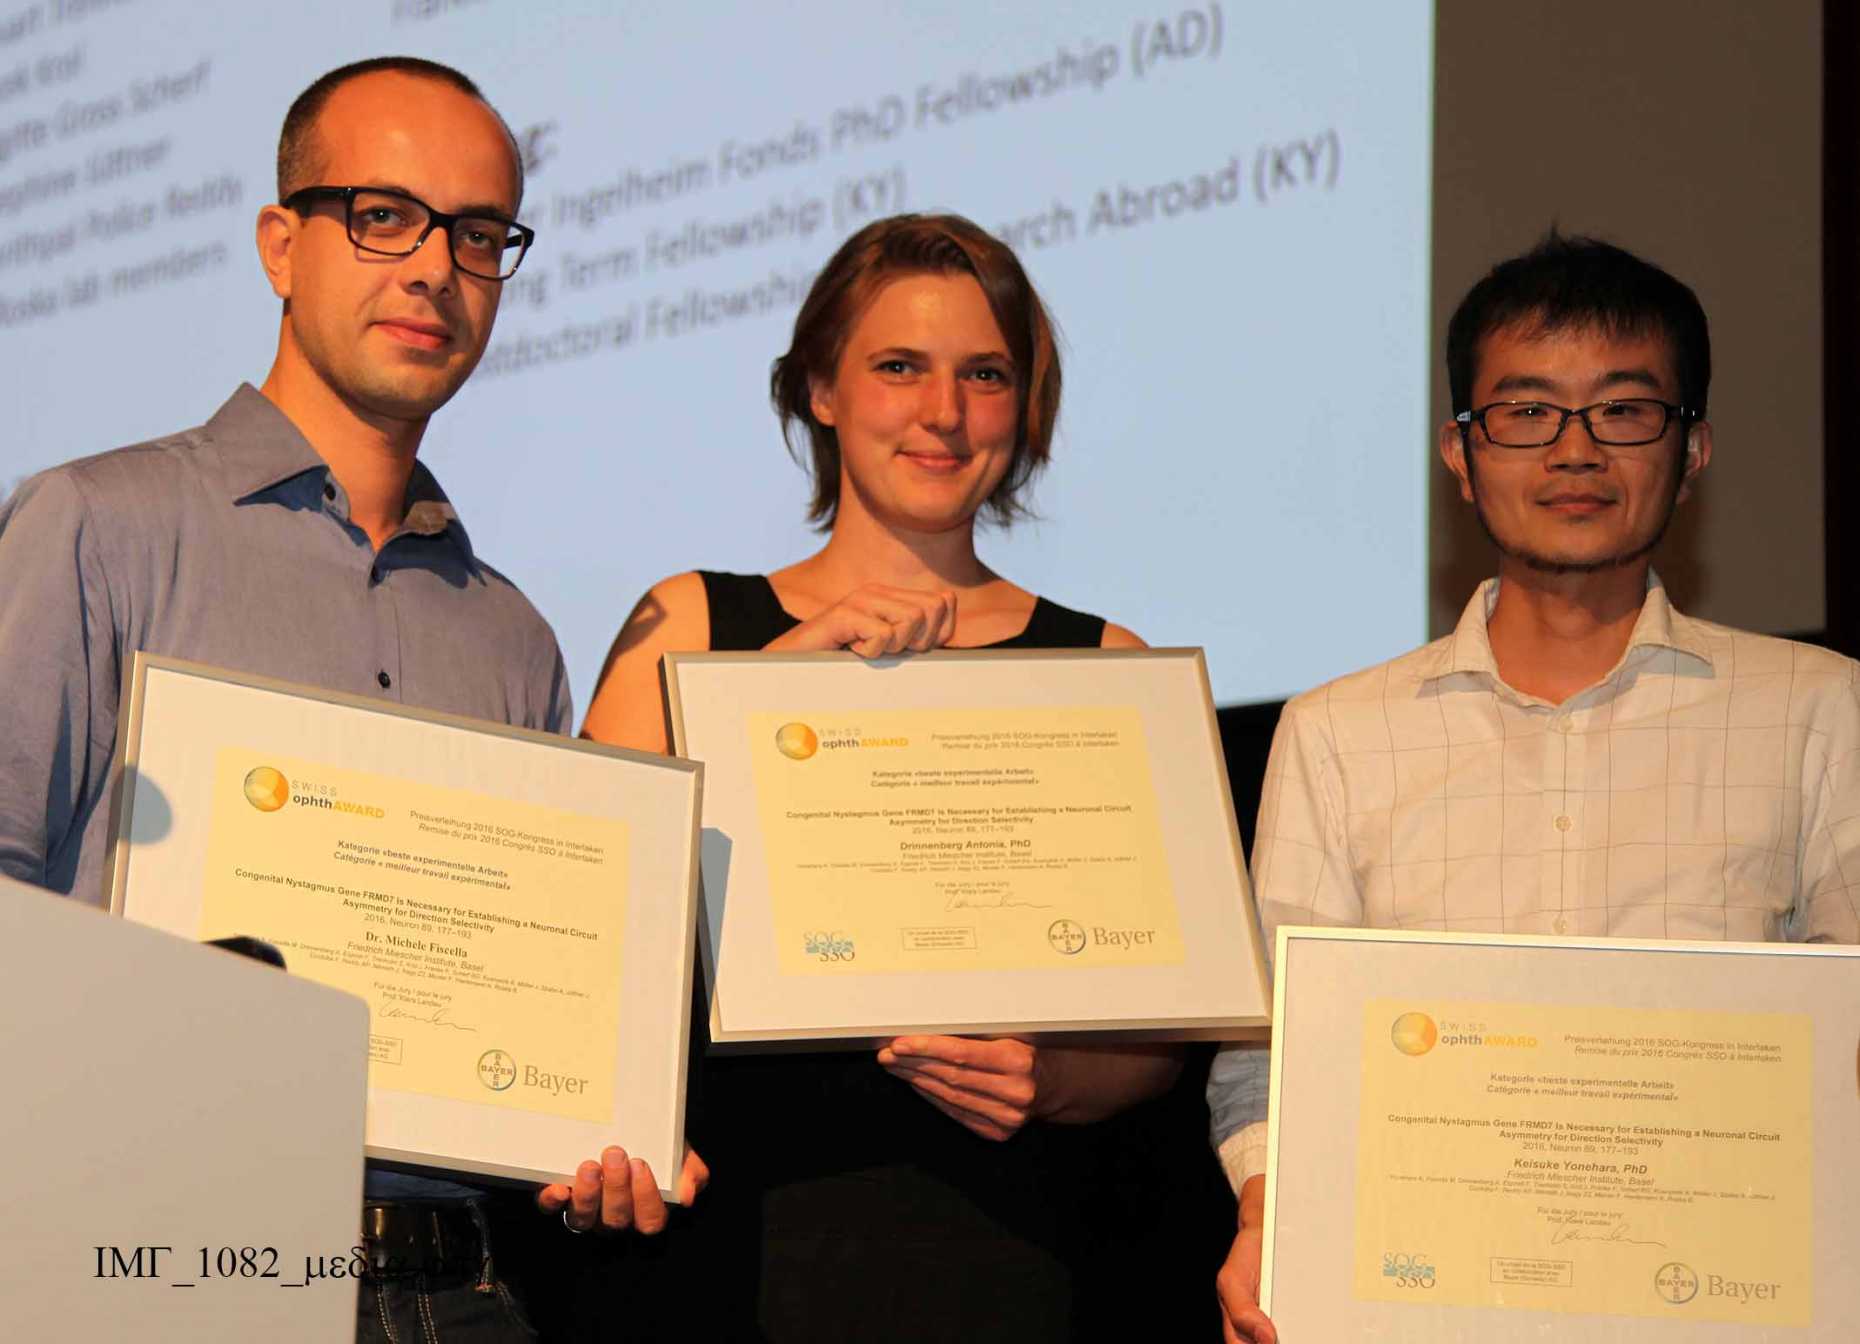 Enlarged view: Michele Fiscella, Antonia Drinnenberg and Keysuke Yonehara at the award ceremony.